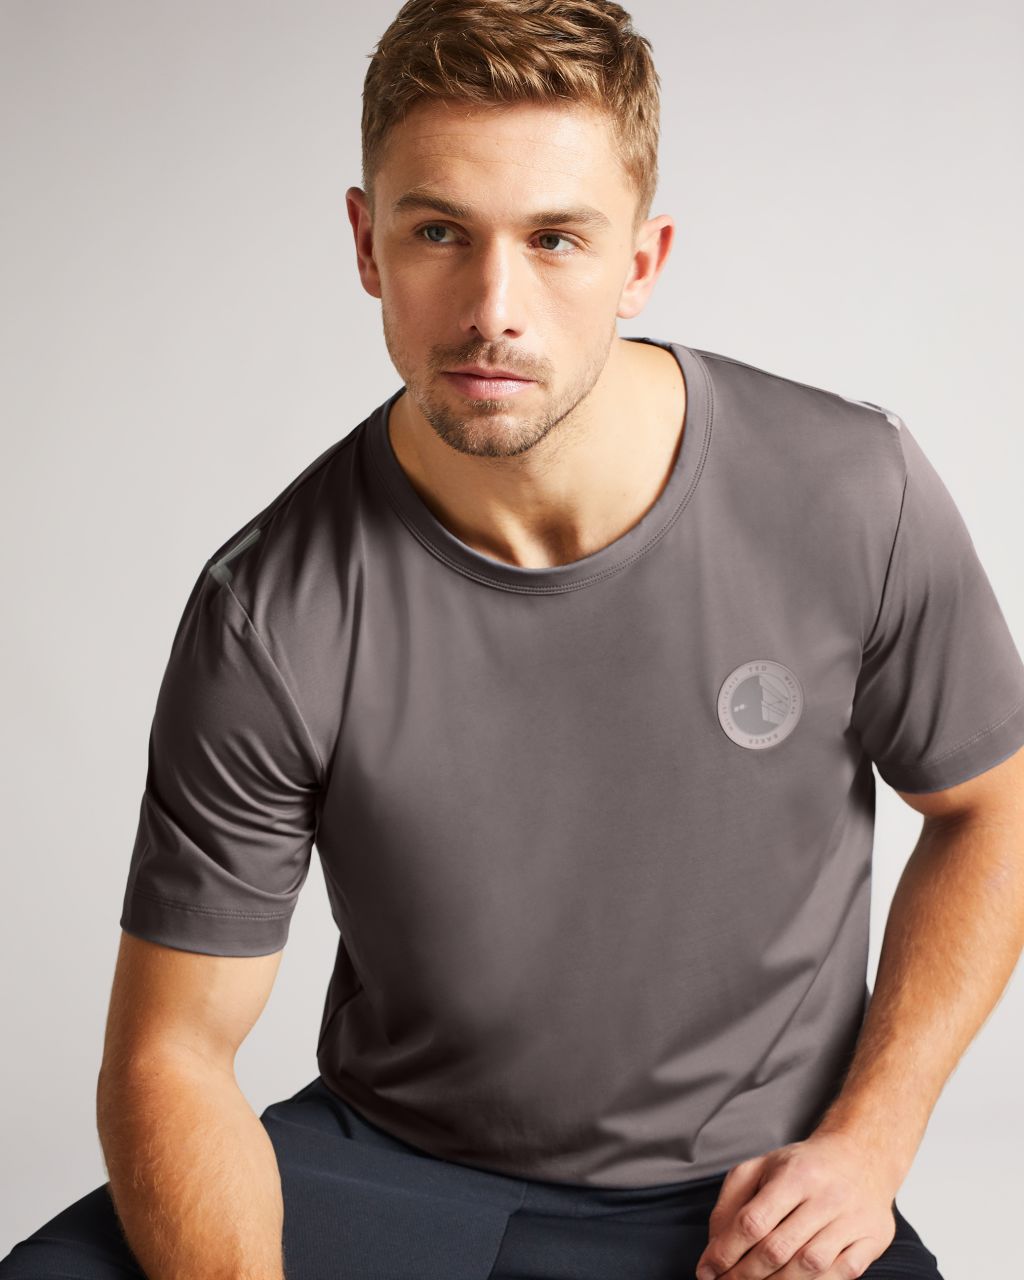 Ted Baker Men's Short Sleeve Active Quick Dry T Shirt in Gray Marl, Roding